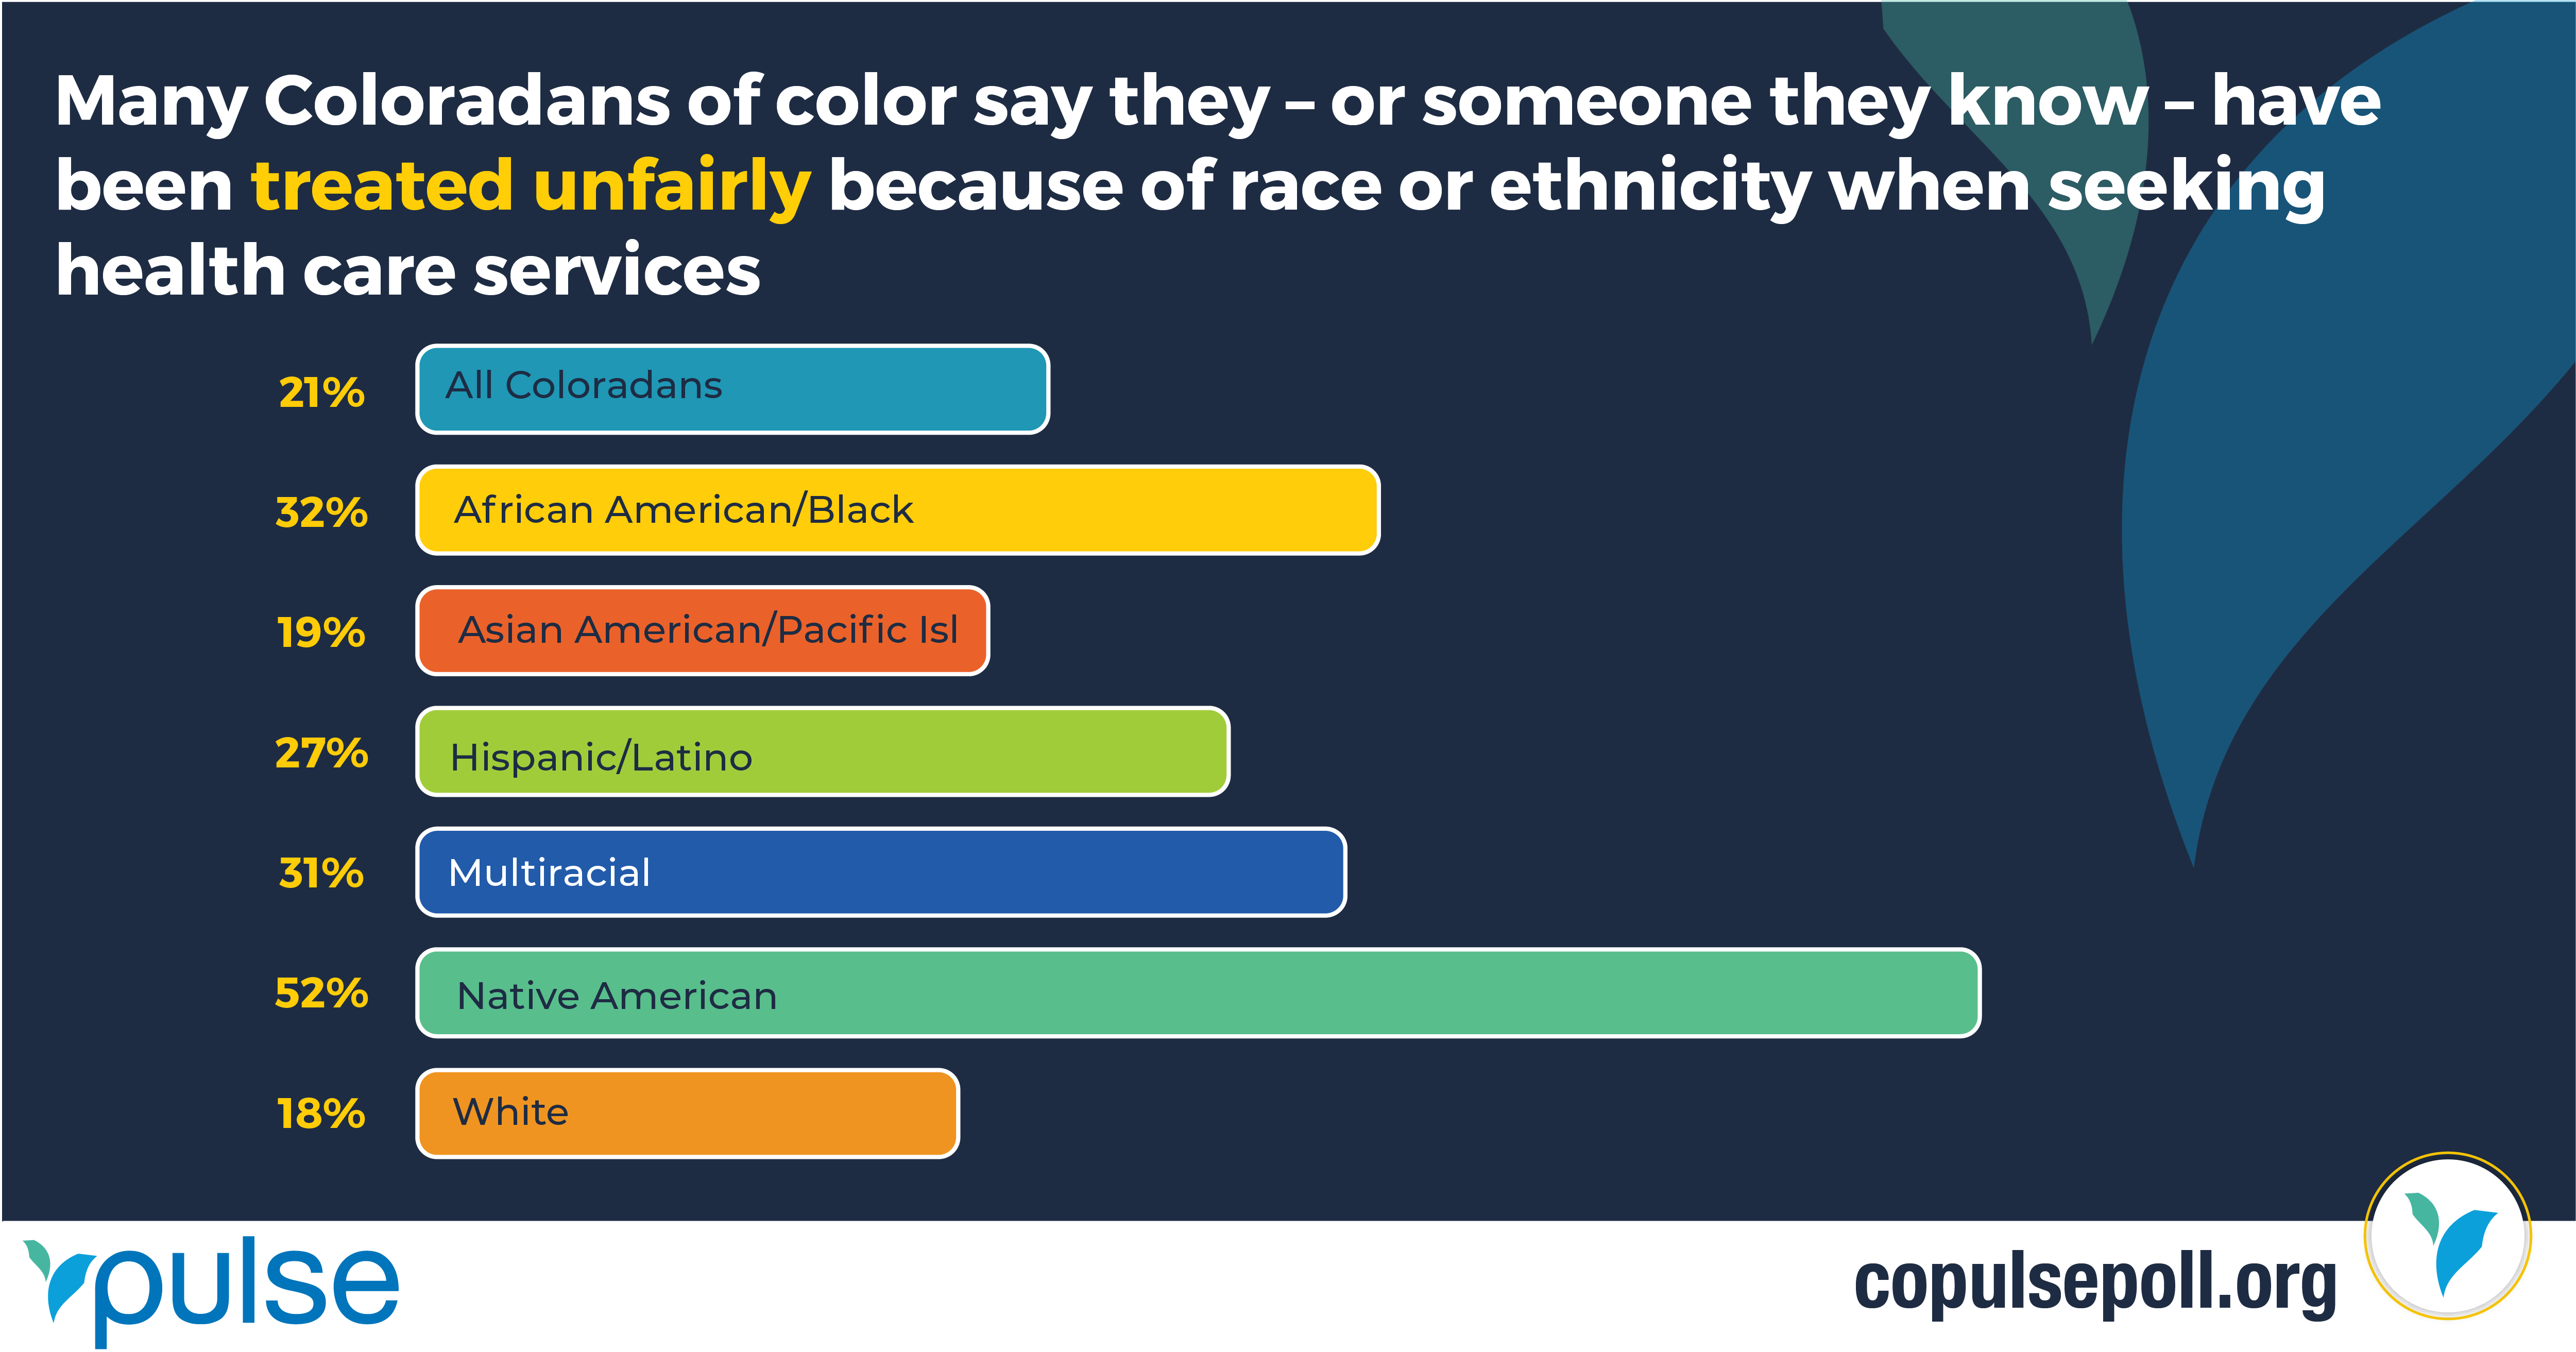 GRAPHIC: Many Coloradans of color say they - or someone they know - have been treated unfairly because of race or ethnicity when seeking health care services. 